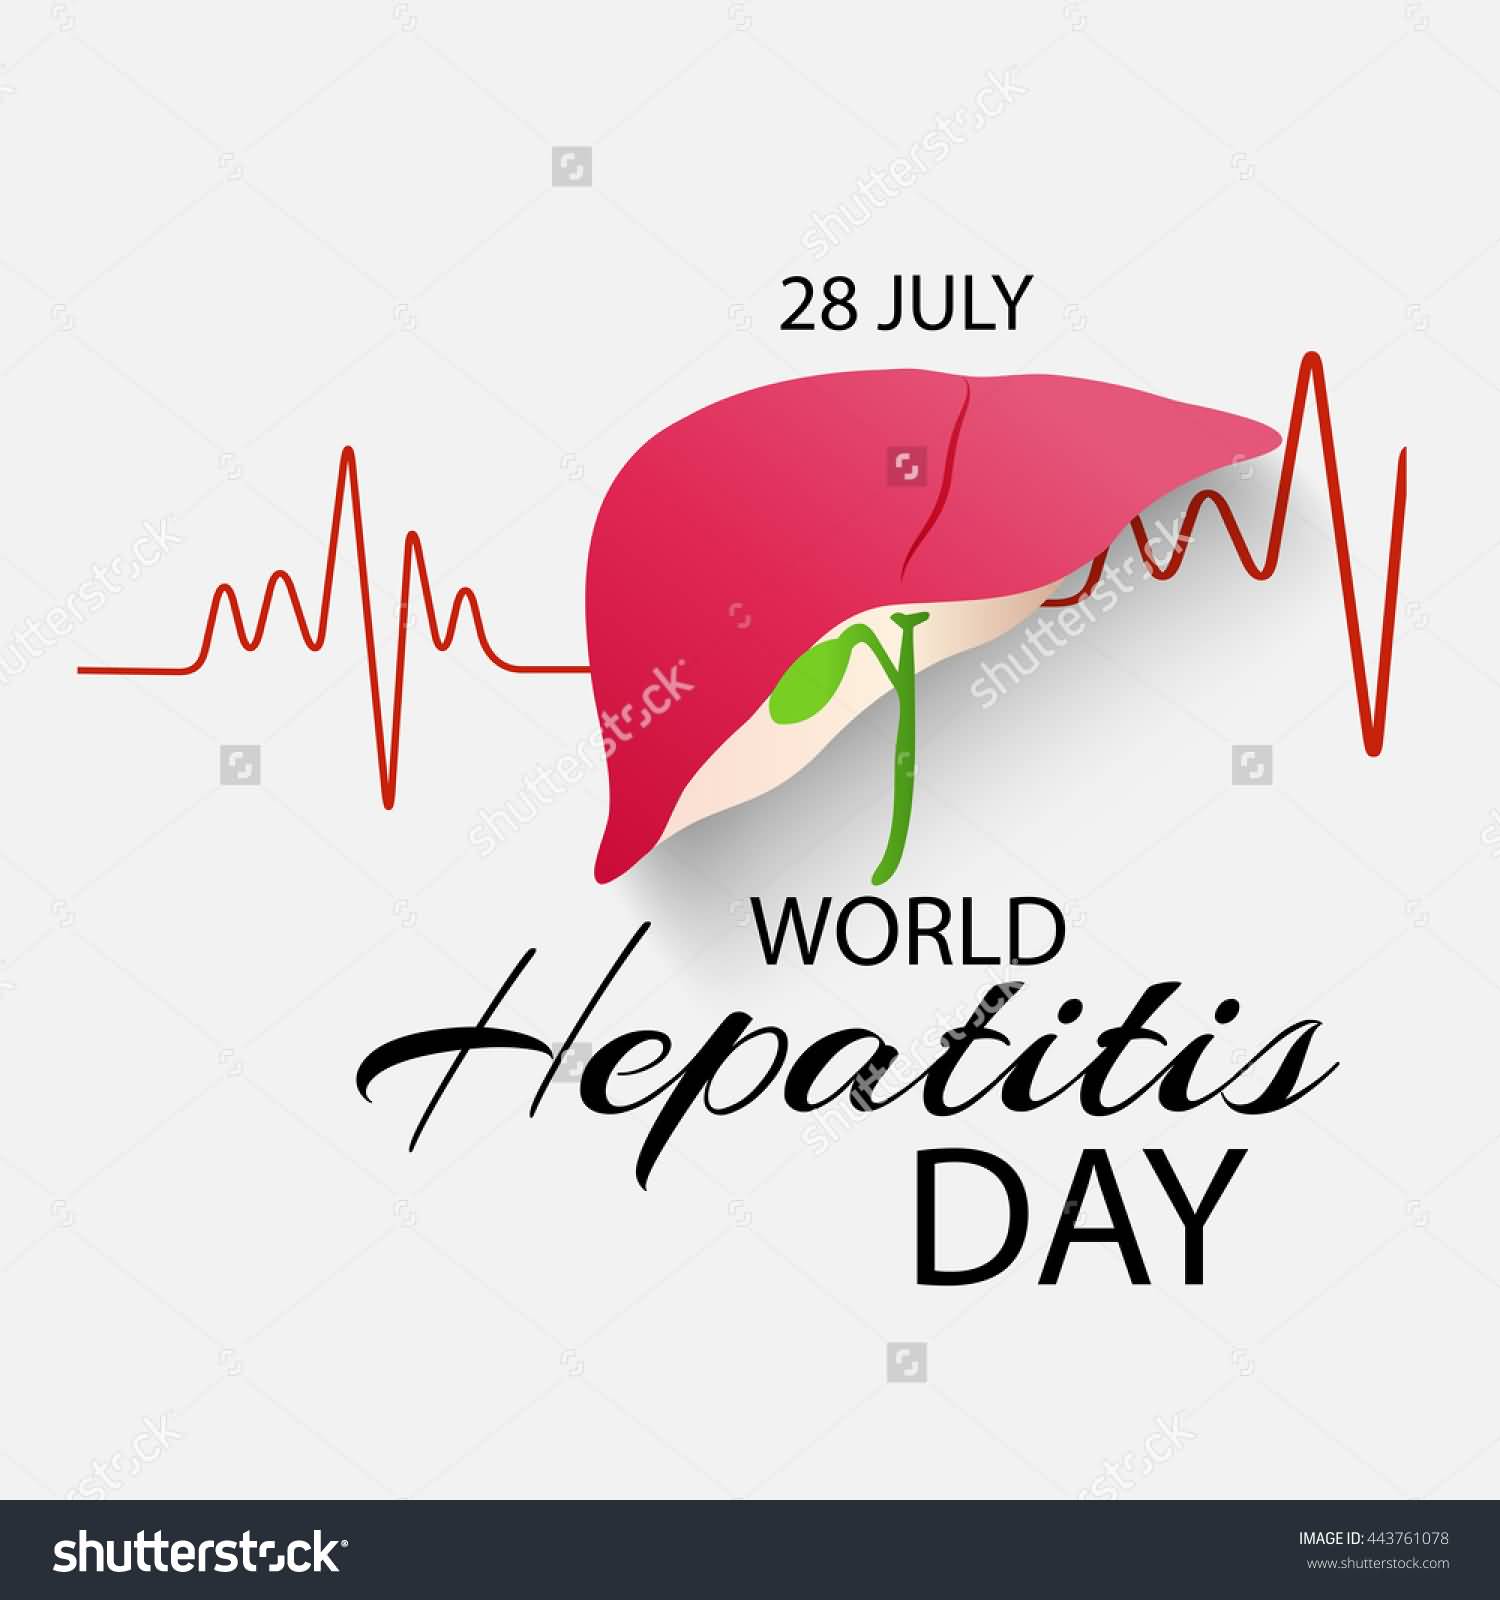 28 July World Hepatitis Day Liver And Heart Beat Illustration